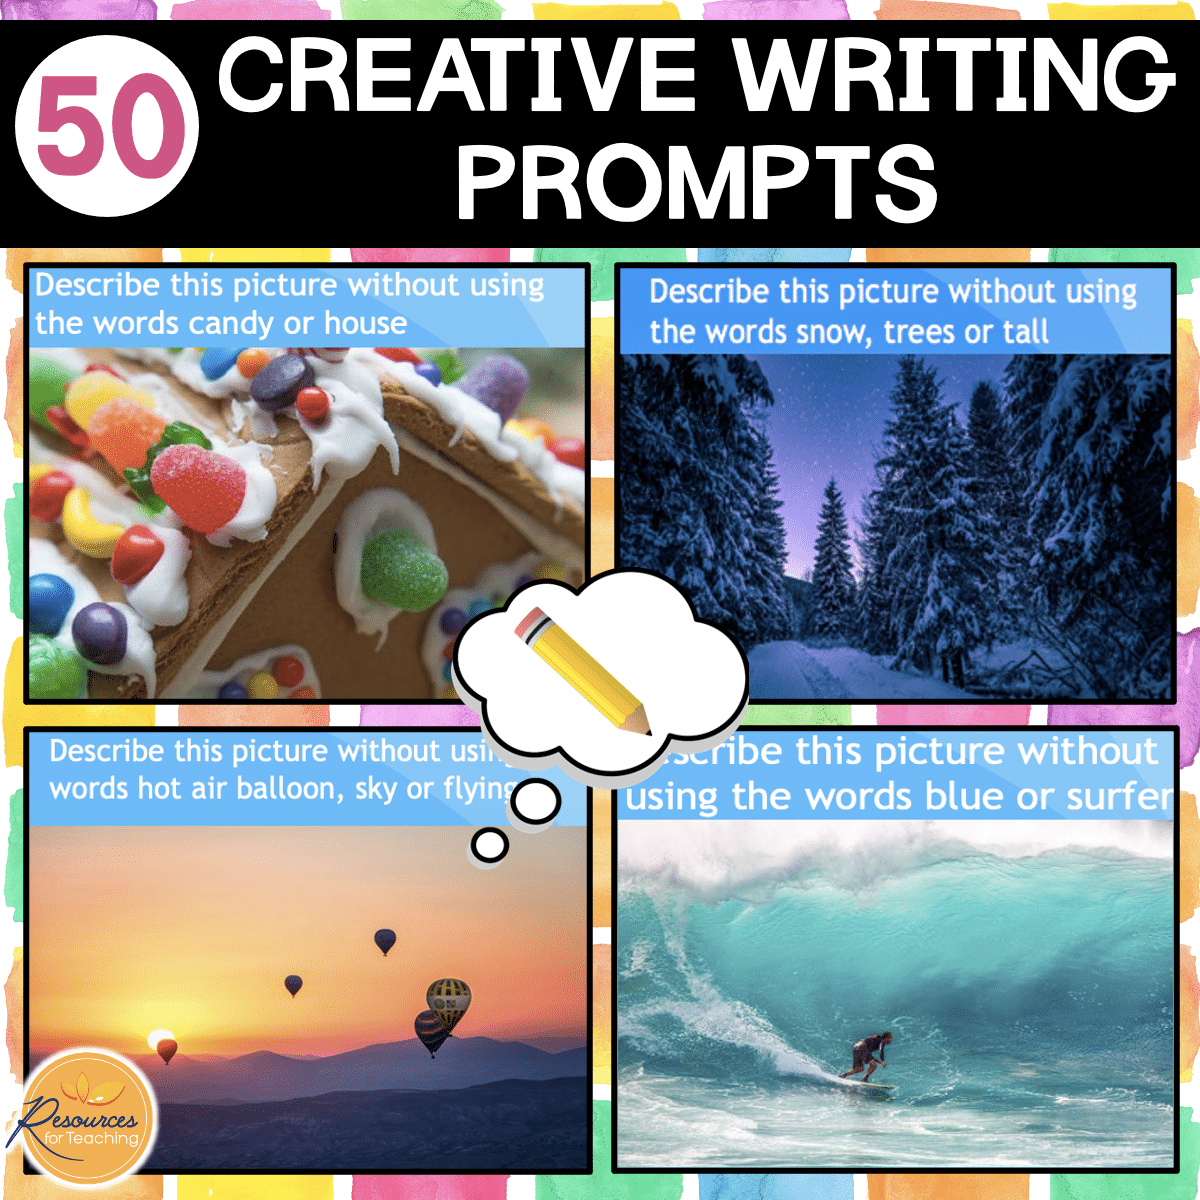 creative writing prompts for hs